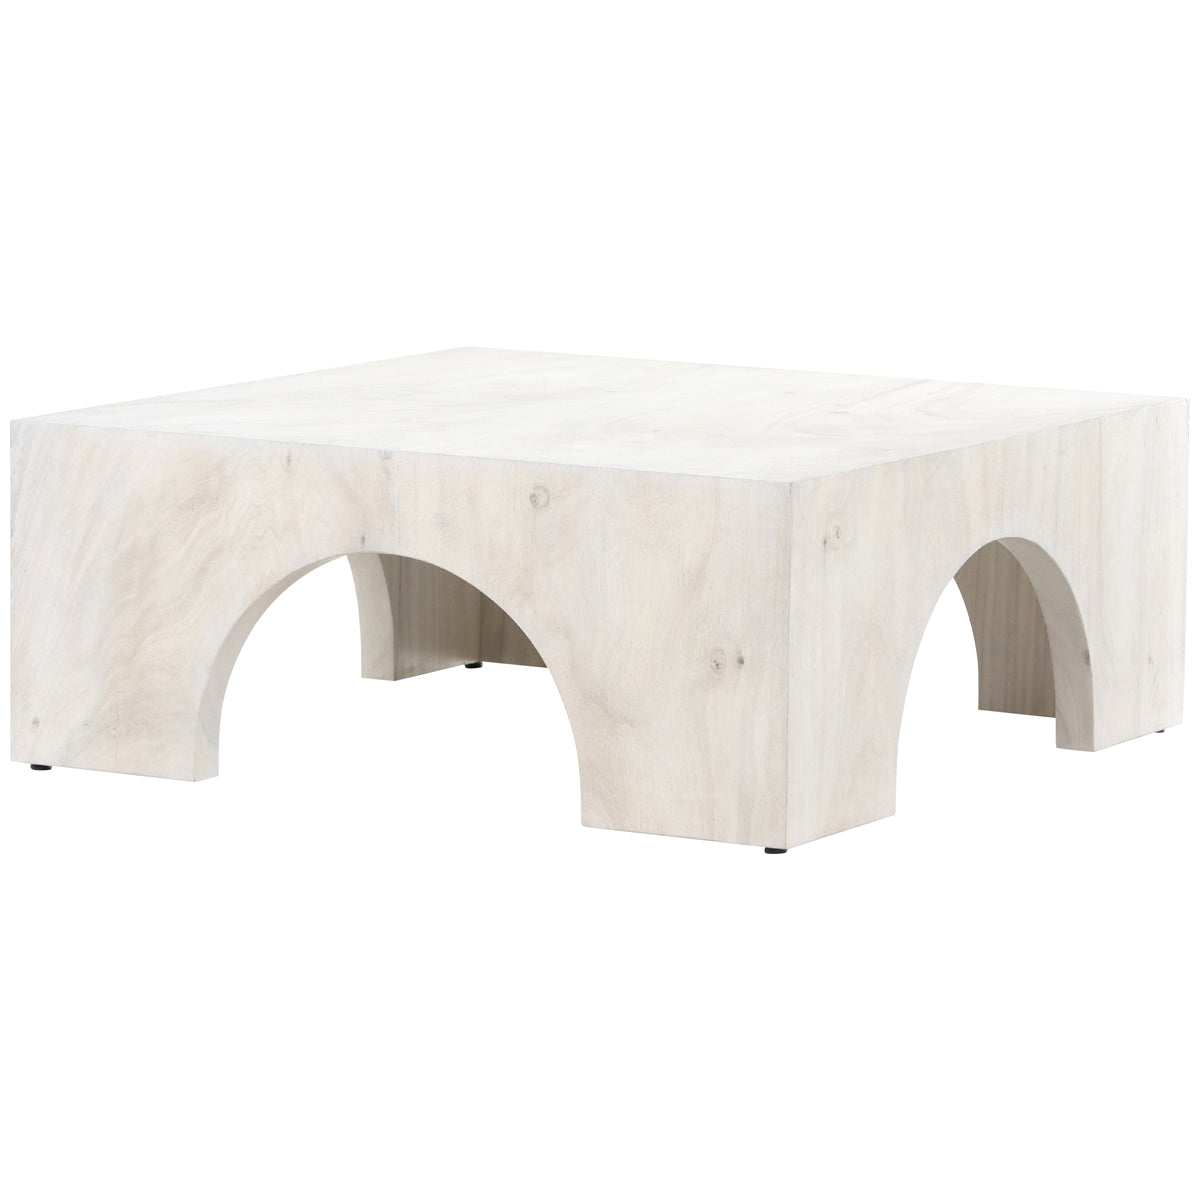 Four Hands Wesson Fausto Coffee Table - Bleached Guanacaste